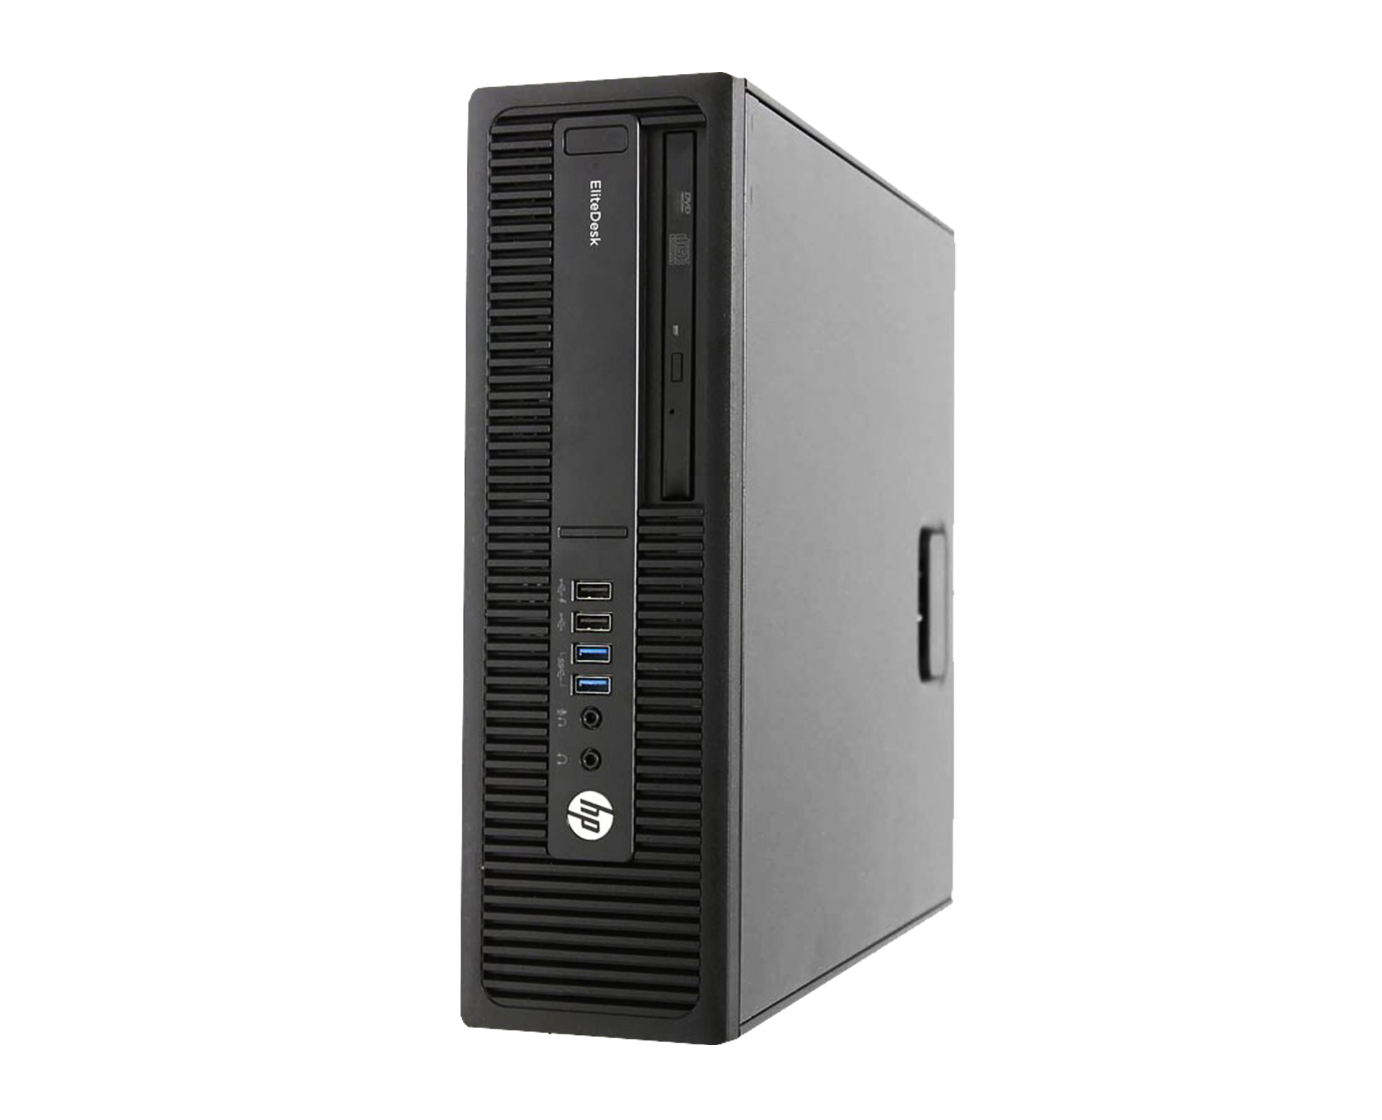 Pack HP Elitedesk 800 G1 + Asus Be24a / Core I3 4130 3,4ghz / 16Gb ram / 500Gb / 24" Superior FullHD / Win 10 Pro ¡Ex-demo!